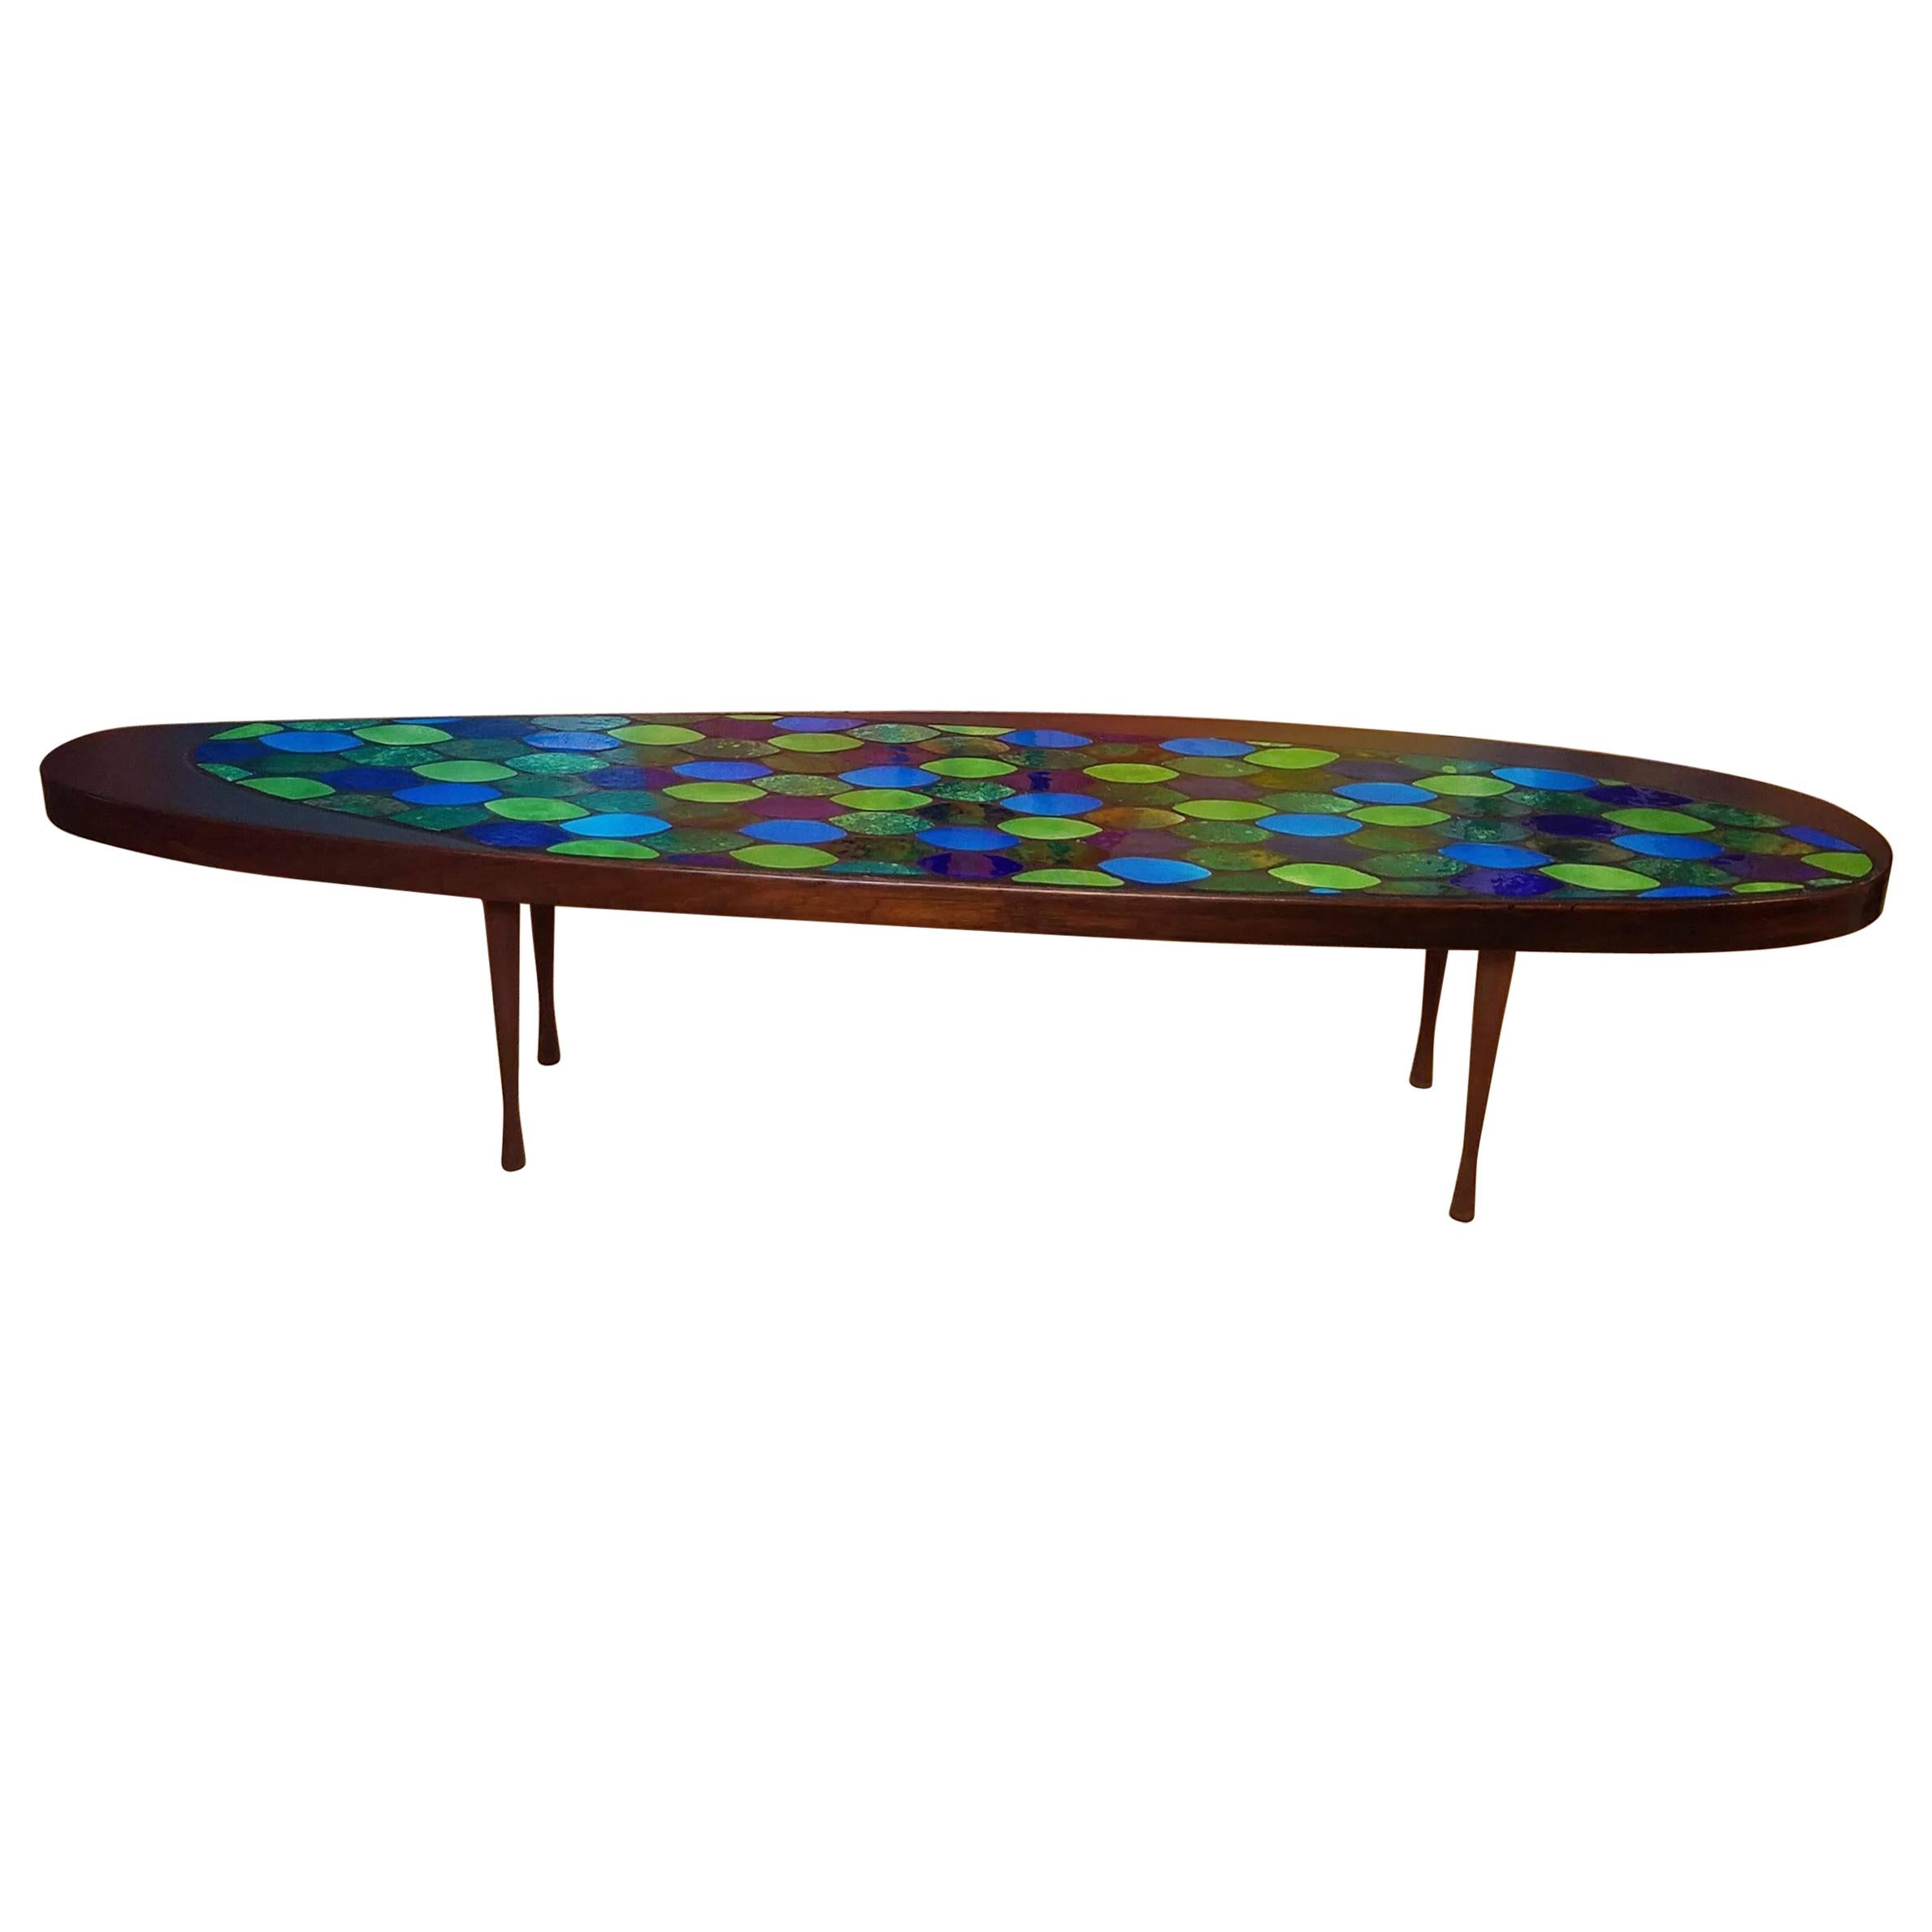 Studio Crafted Georges Briard Style Coffee Table Possibly John Rothschild, 1960s